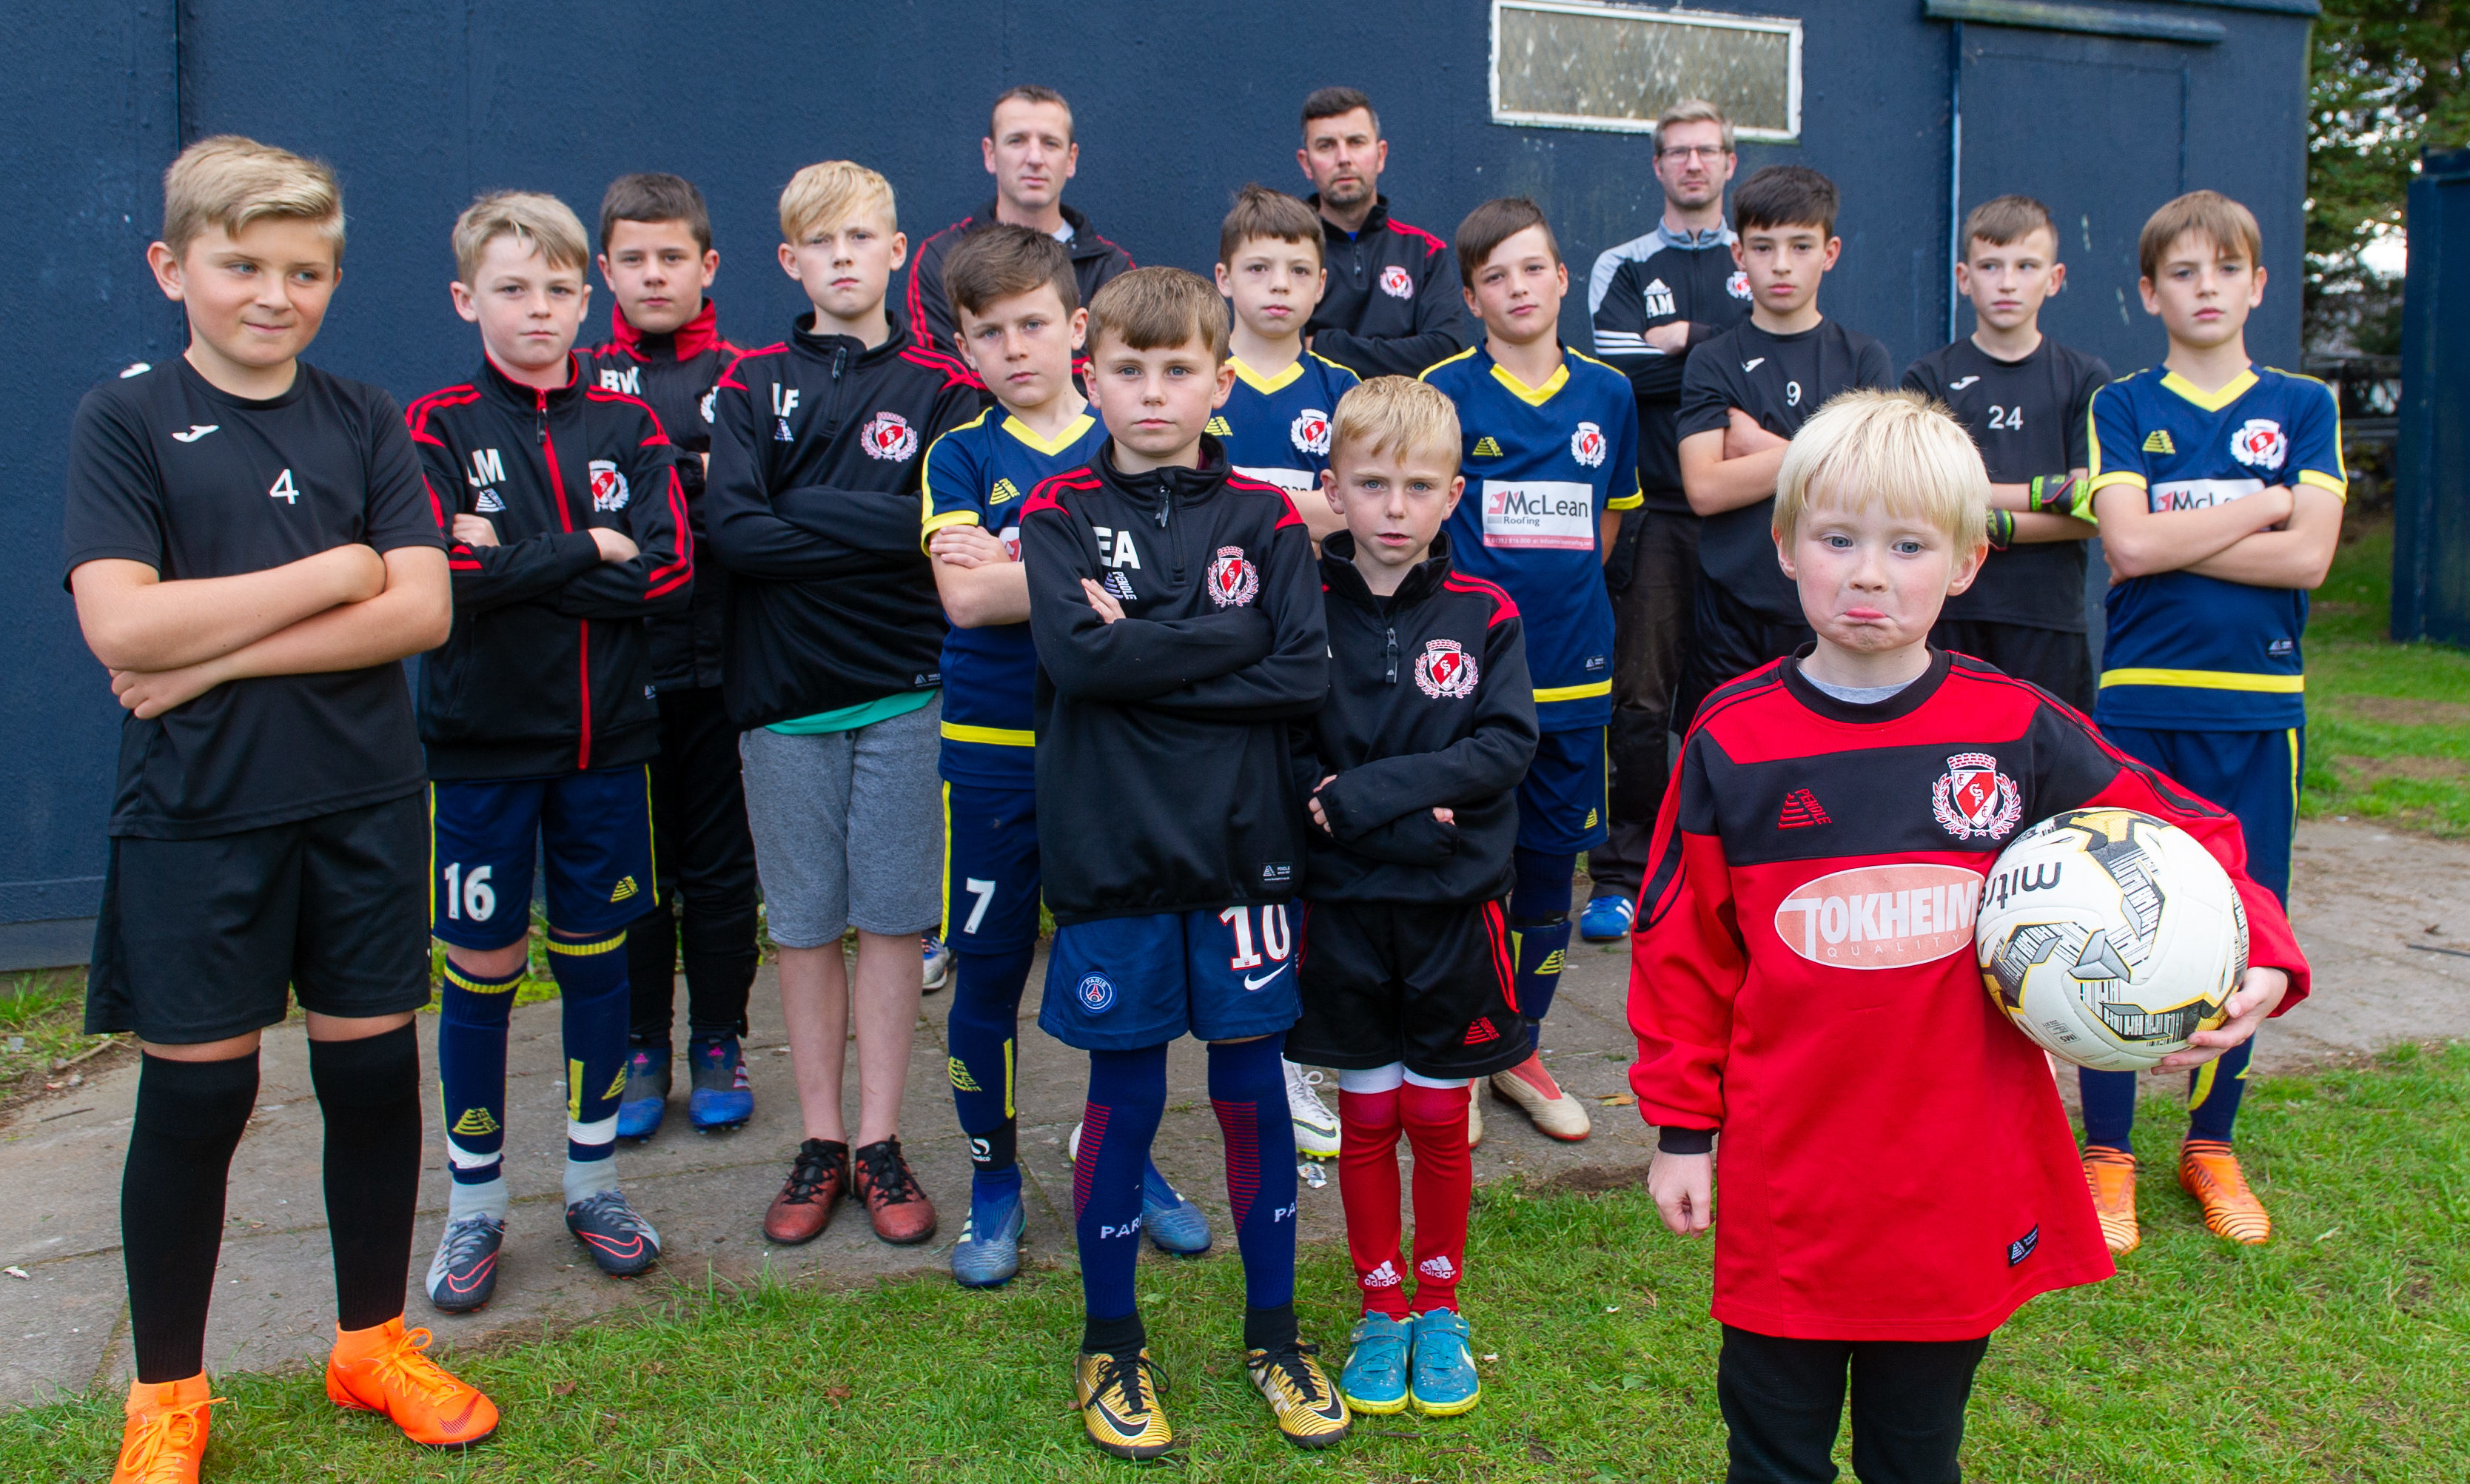 The young Carnoustie Panmure footballers were left shocked after thieves broke into their changing rooms